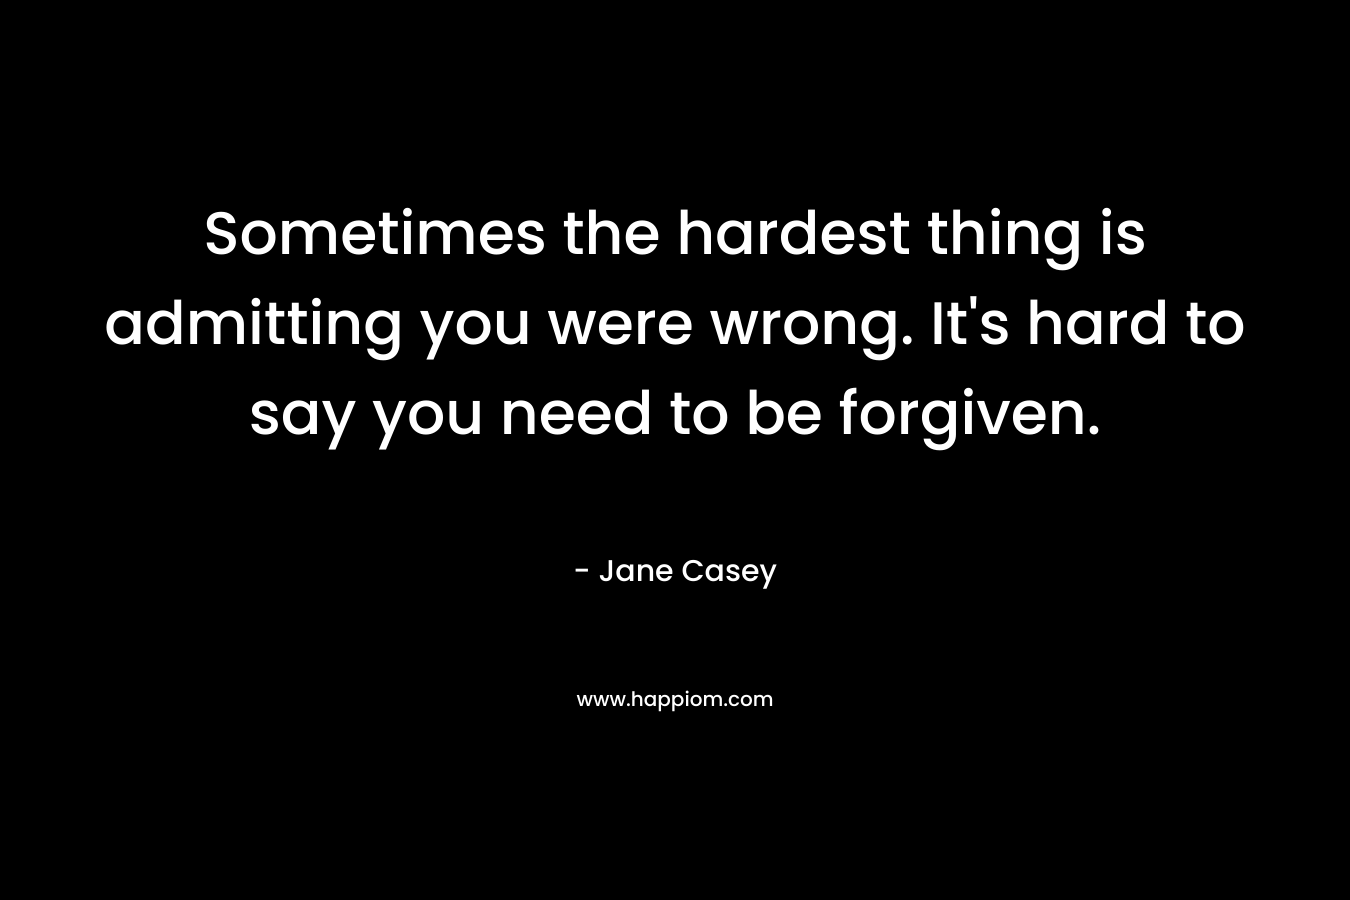 Sometimes the hardest thing is admitting you were wrong. It’s hard to say you need to be forgiven. – Jane Casey